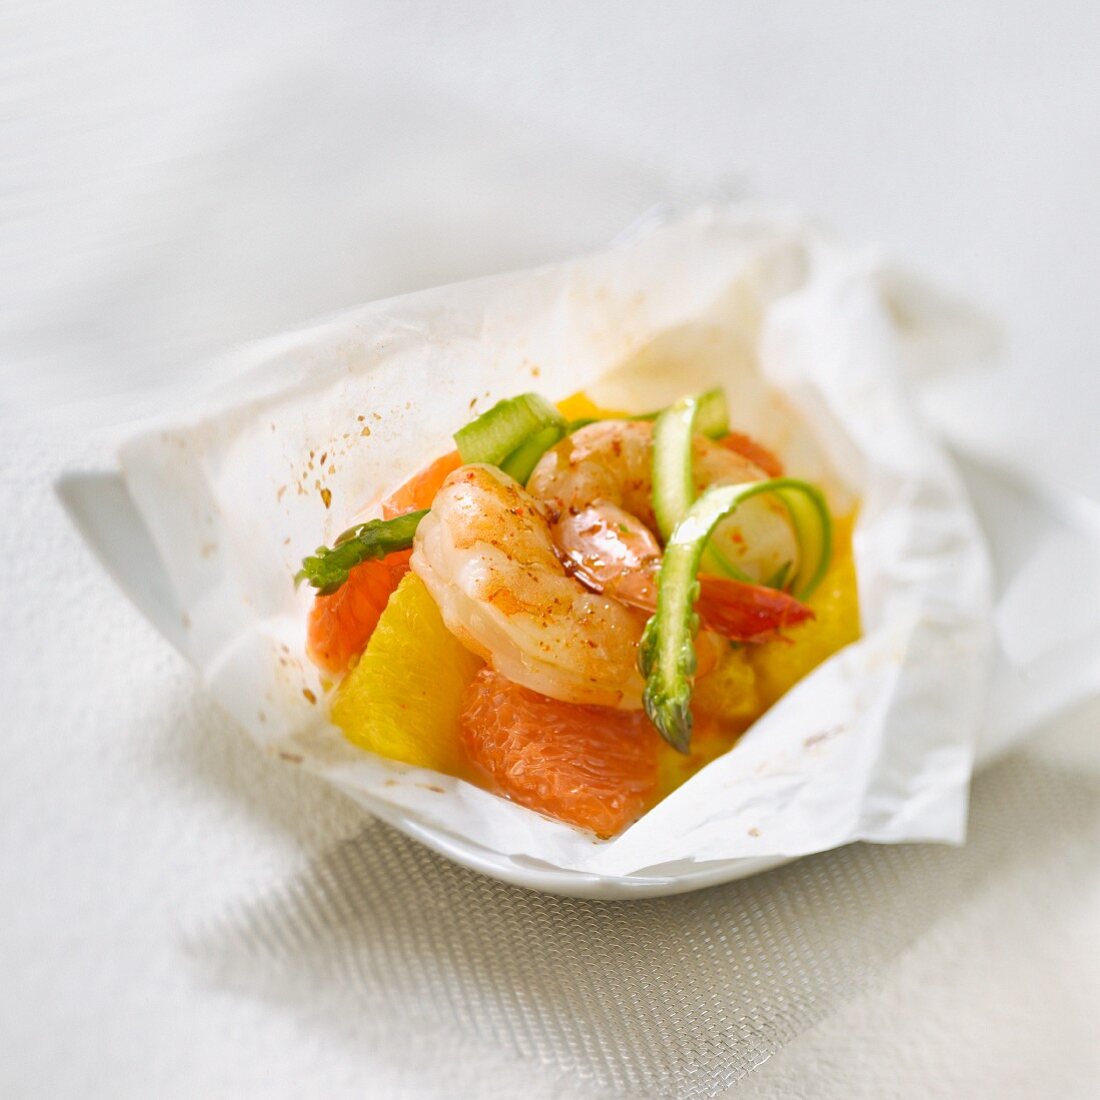 Gambas, citrus fruit, asparagus and Espelette pepper cooked in wax paper